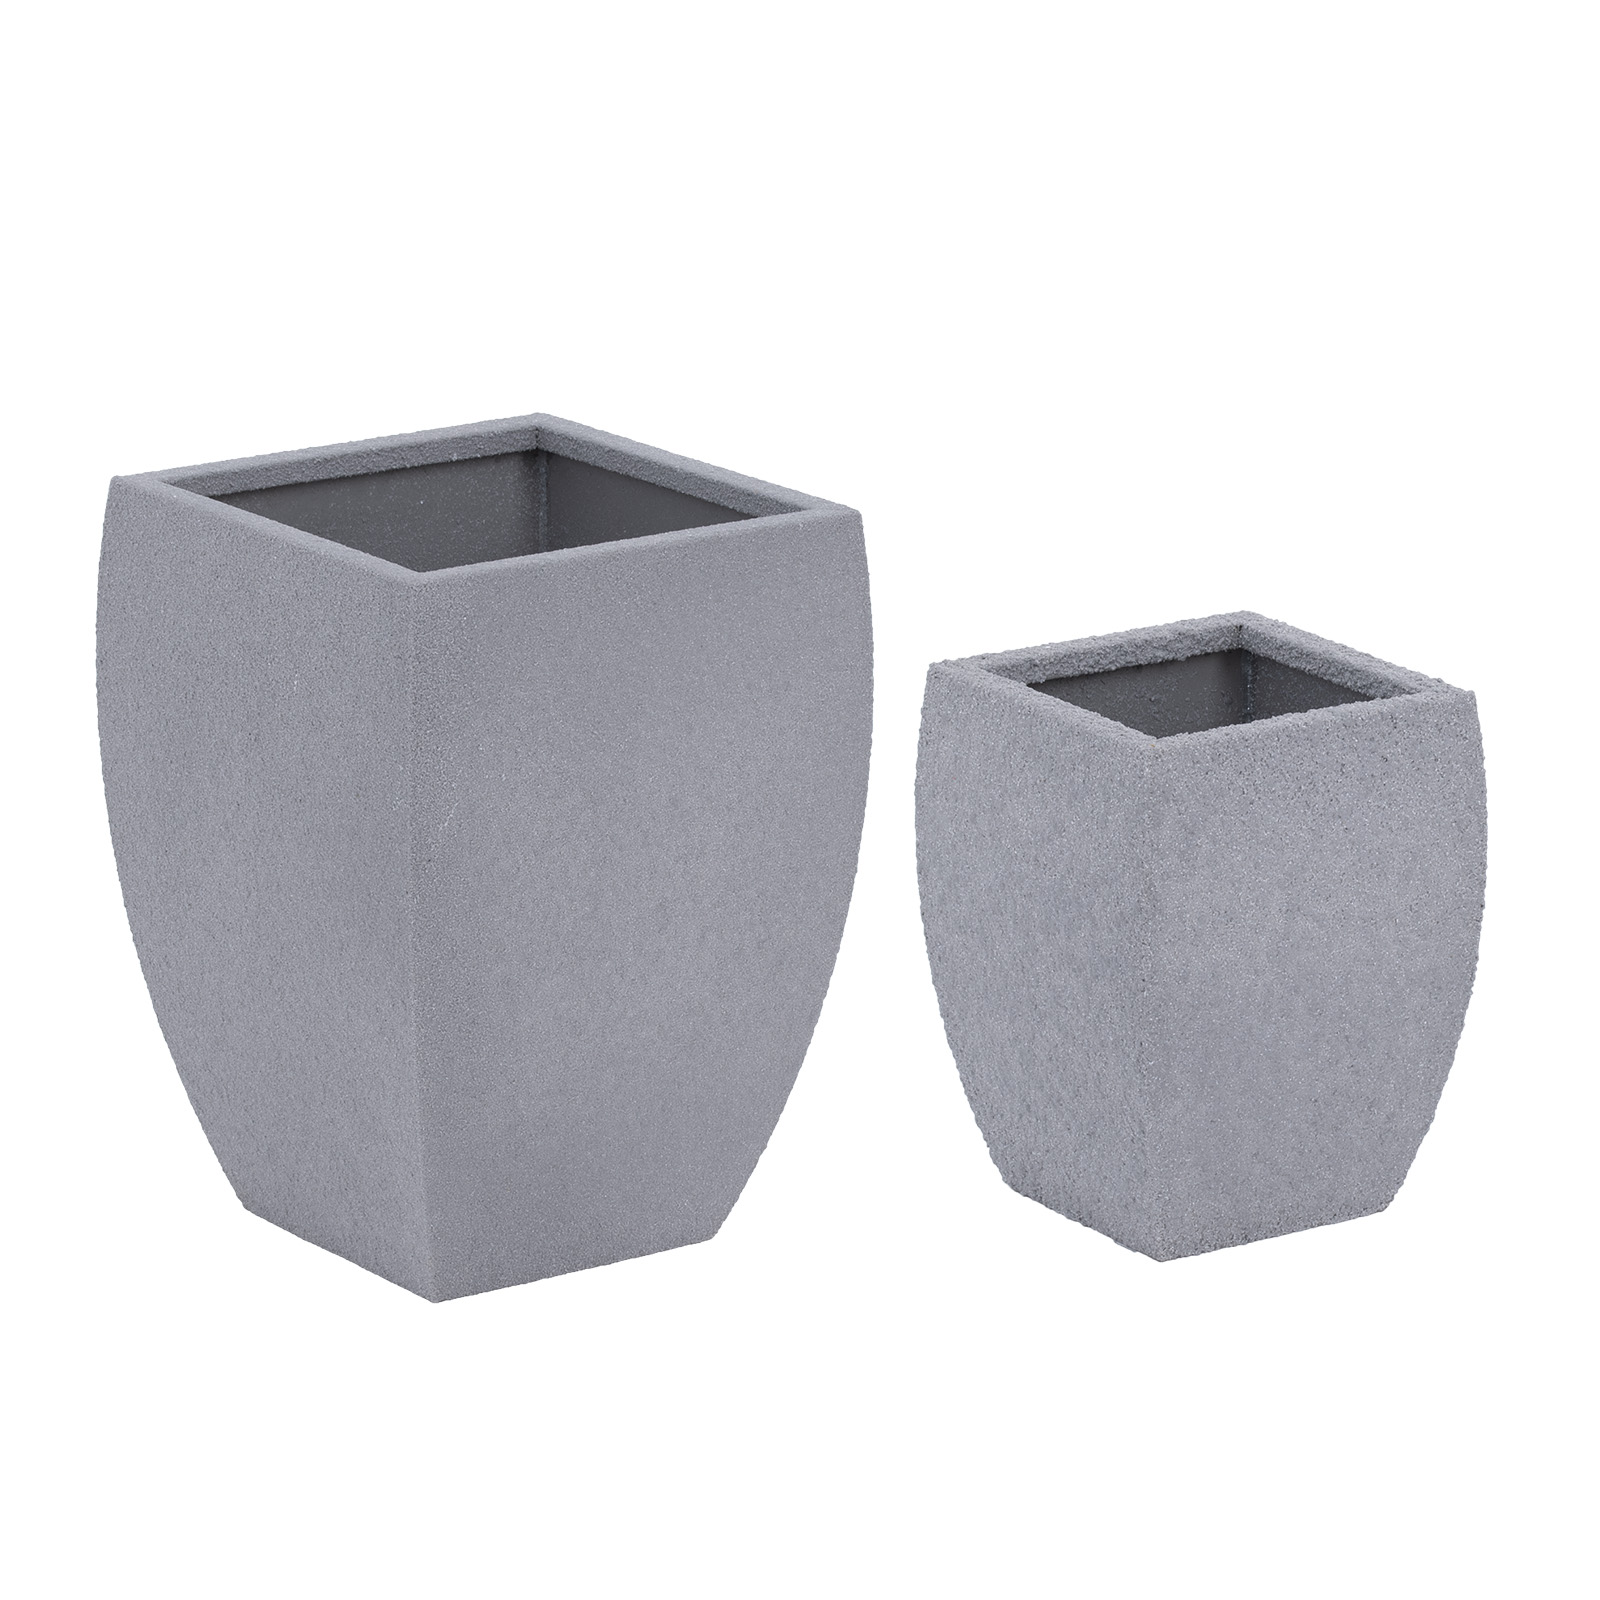 Planter Pot - Set of 2 - Corten steel - conical / rounded - Royal Catering